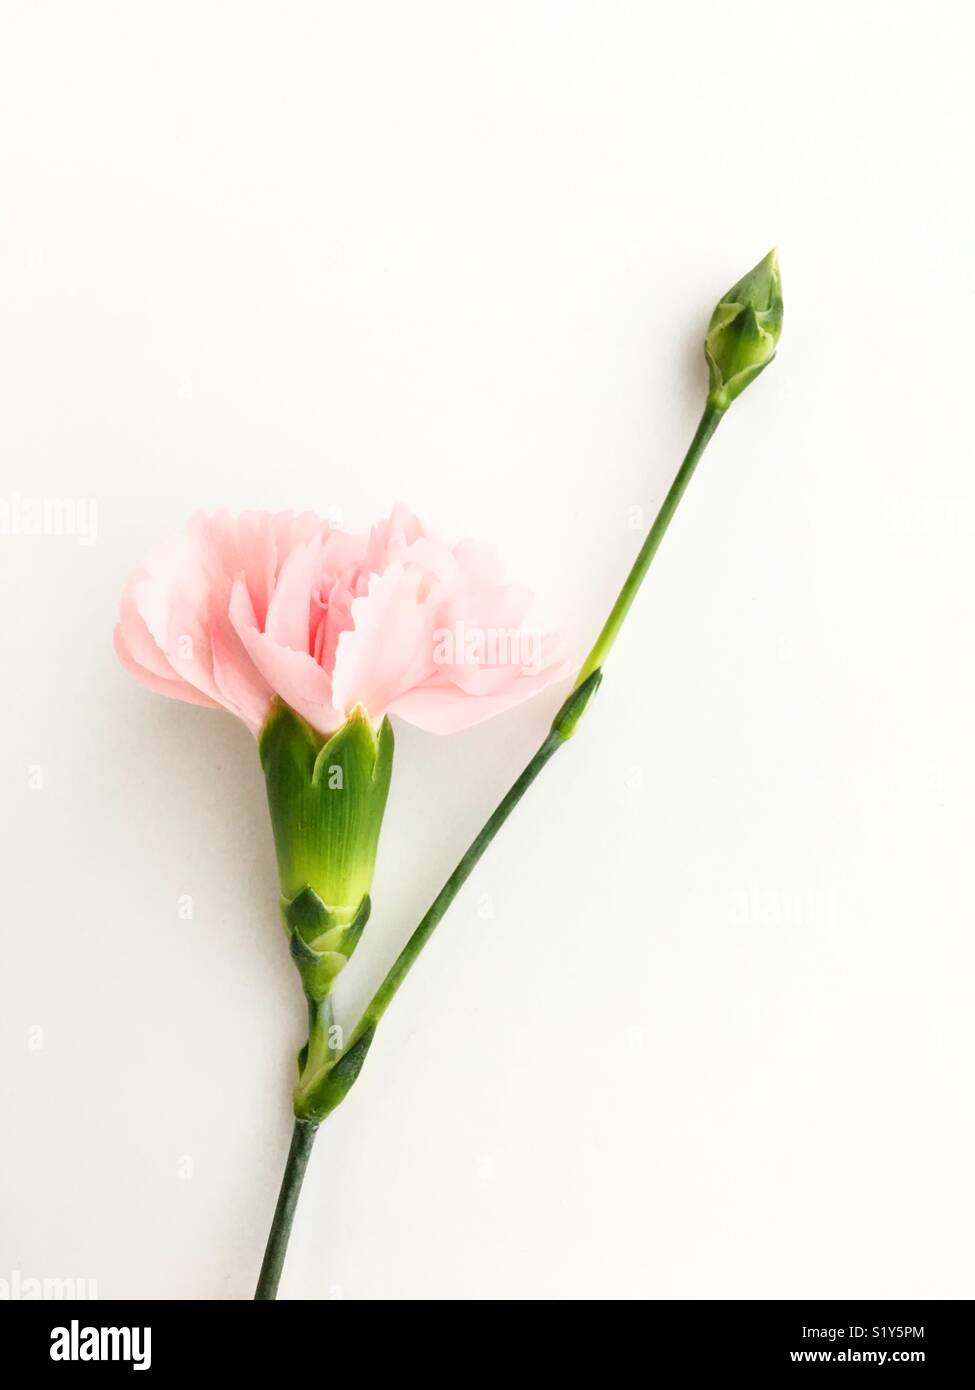 https://c8.alamy.com/comp/S1Y5PM/a-carnation-flower-with-bud-S1Y5PM.jpg